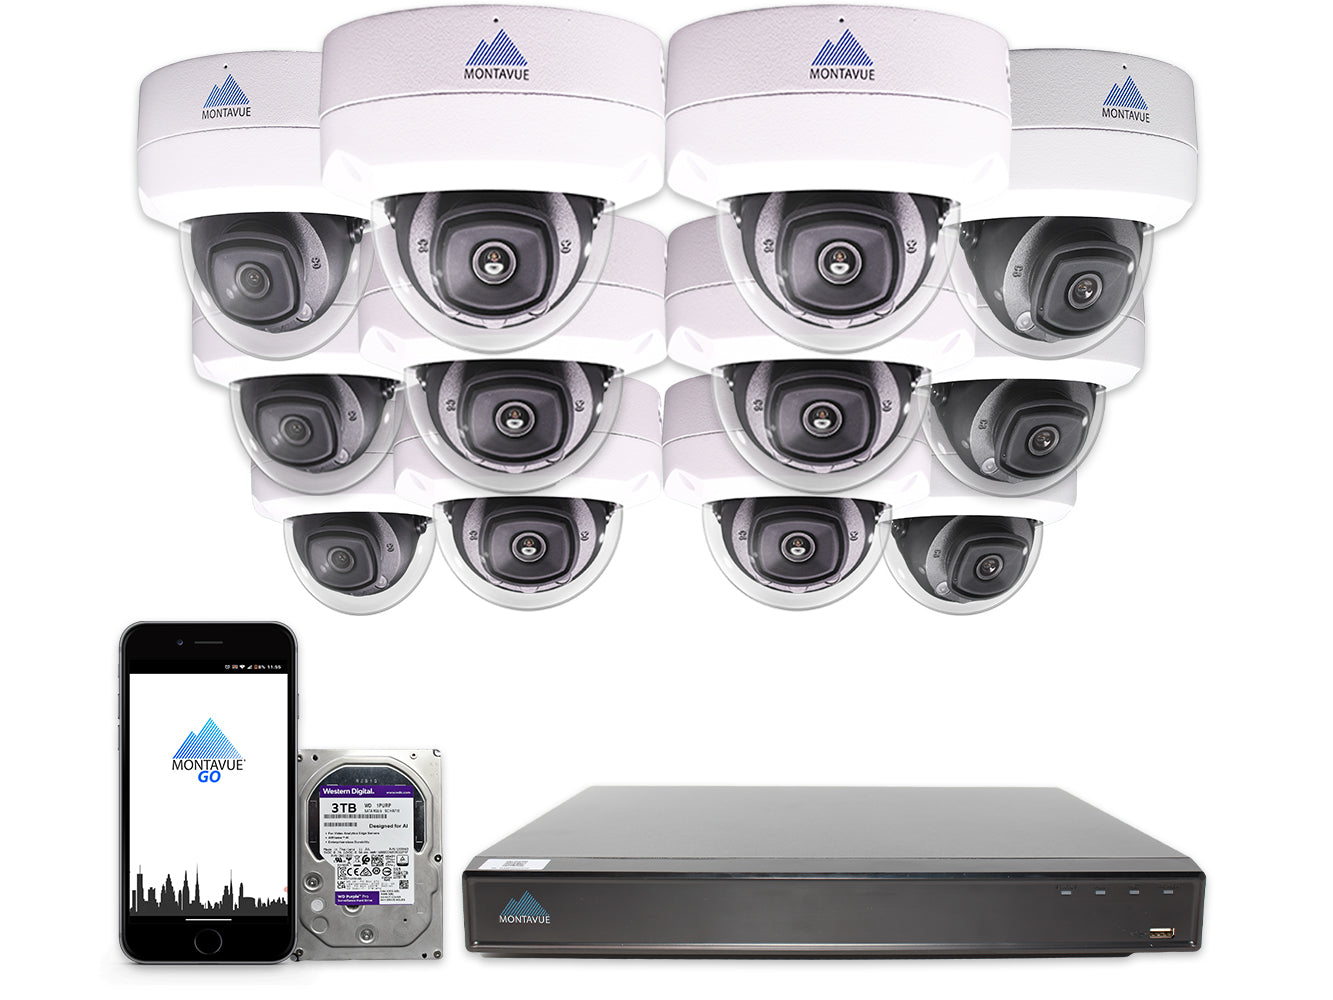 MTD8110 Package | 4K Acupick Vandal-Proof Dome Cameras and 16 Channel 5 Series AI NVR with 3TB HDD - Montavue